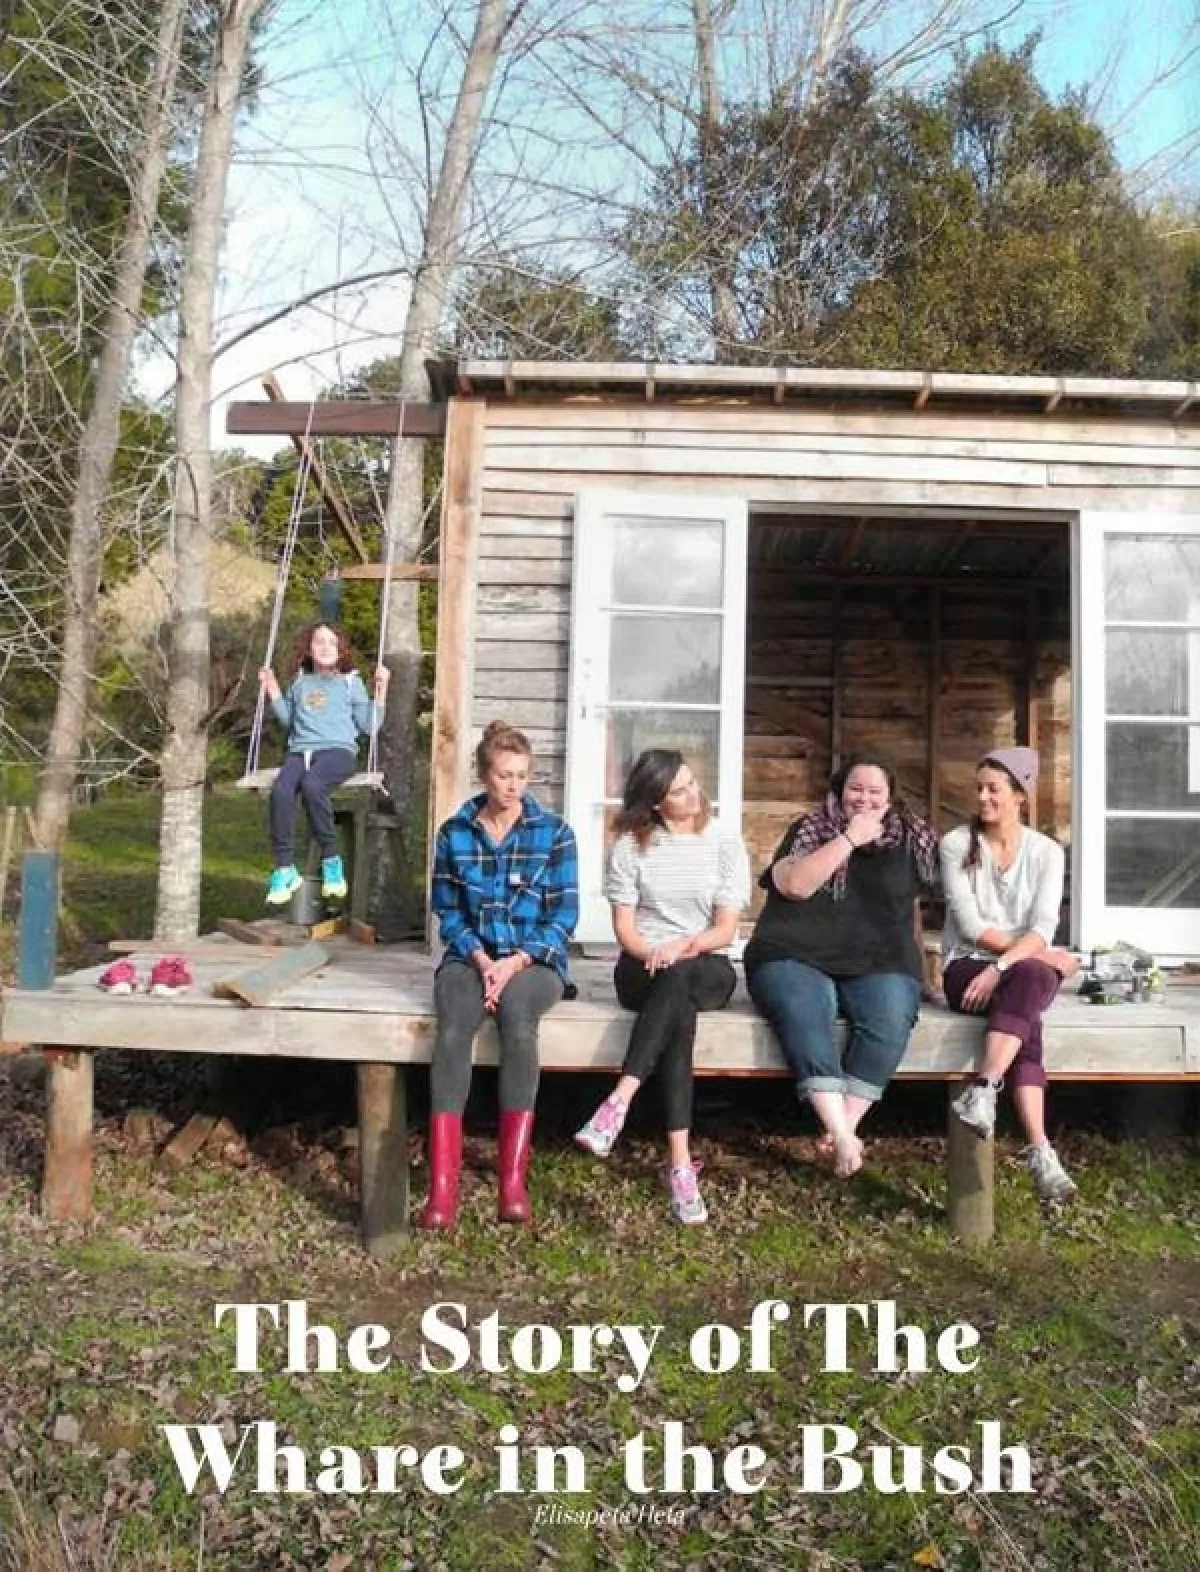 The story of the whare in the bush by elisapeta heta 01